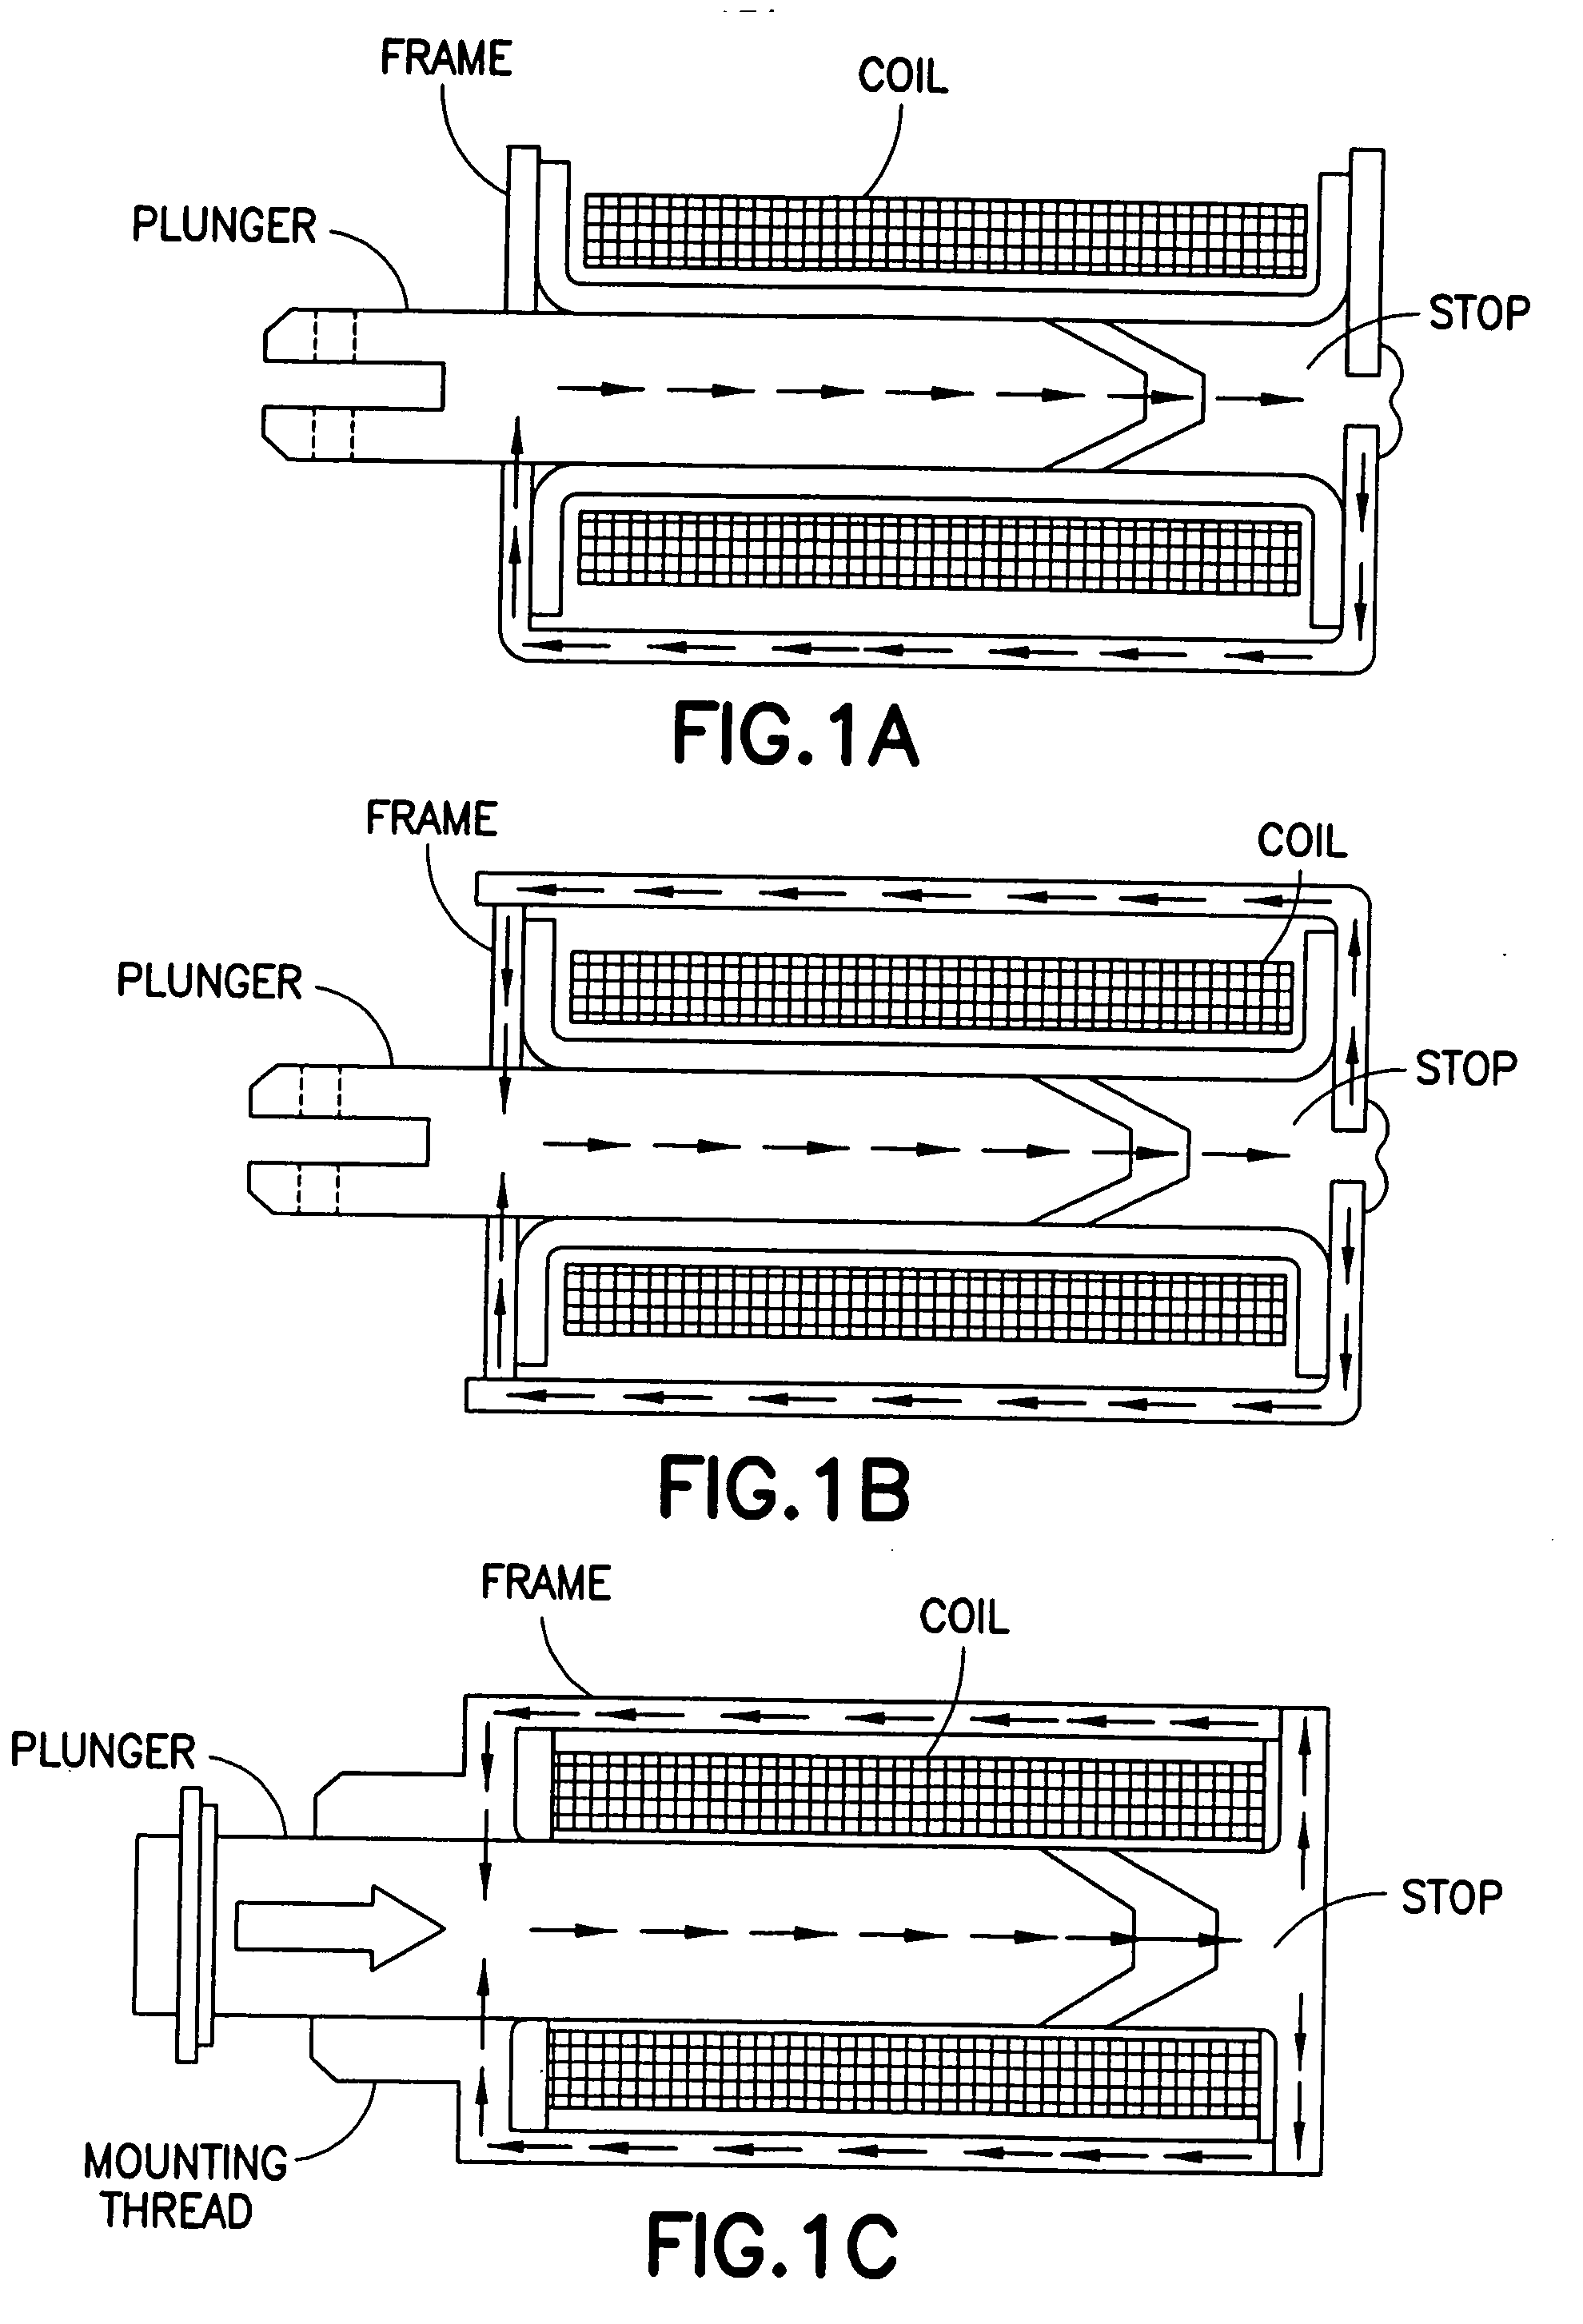 Systems and methods for operating an electromagnetic actuator